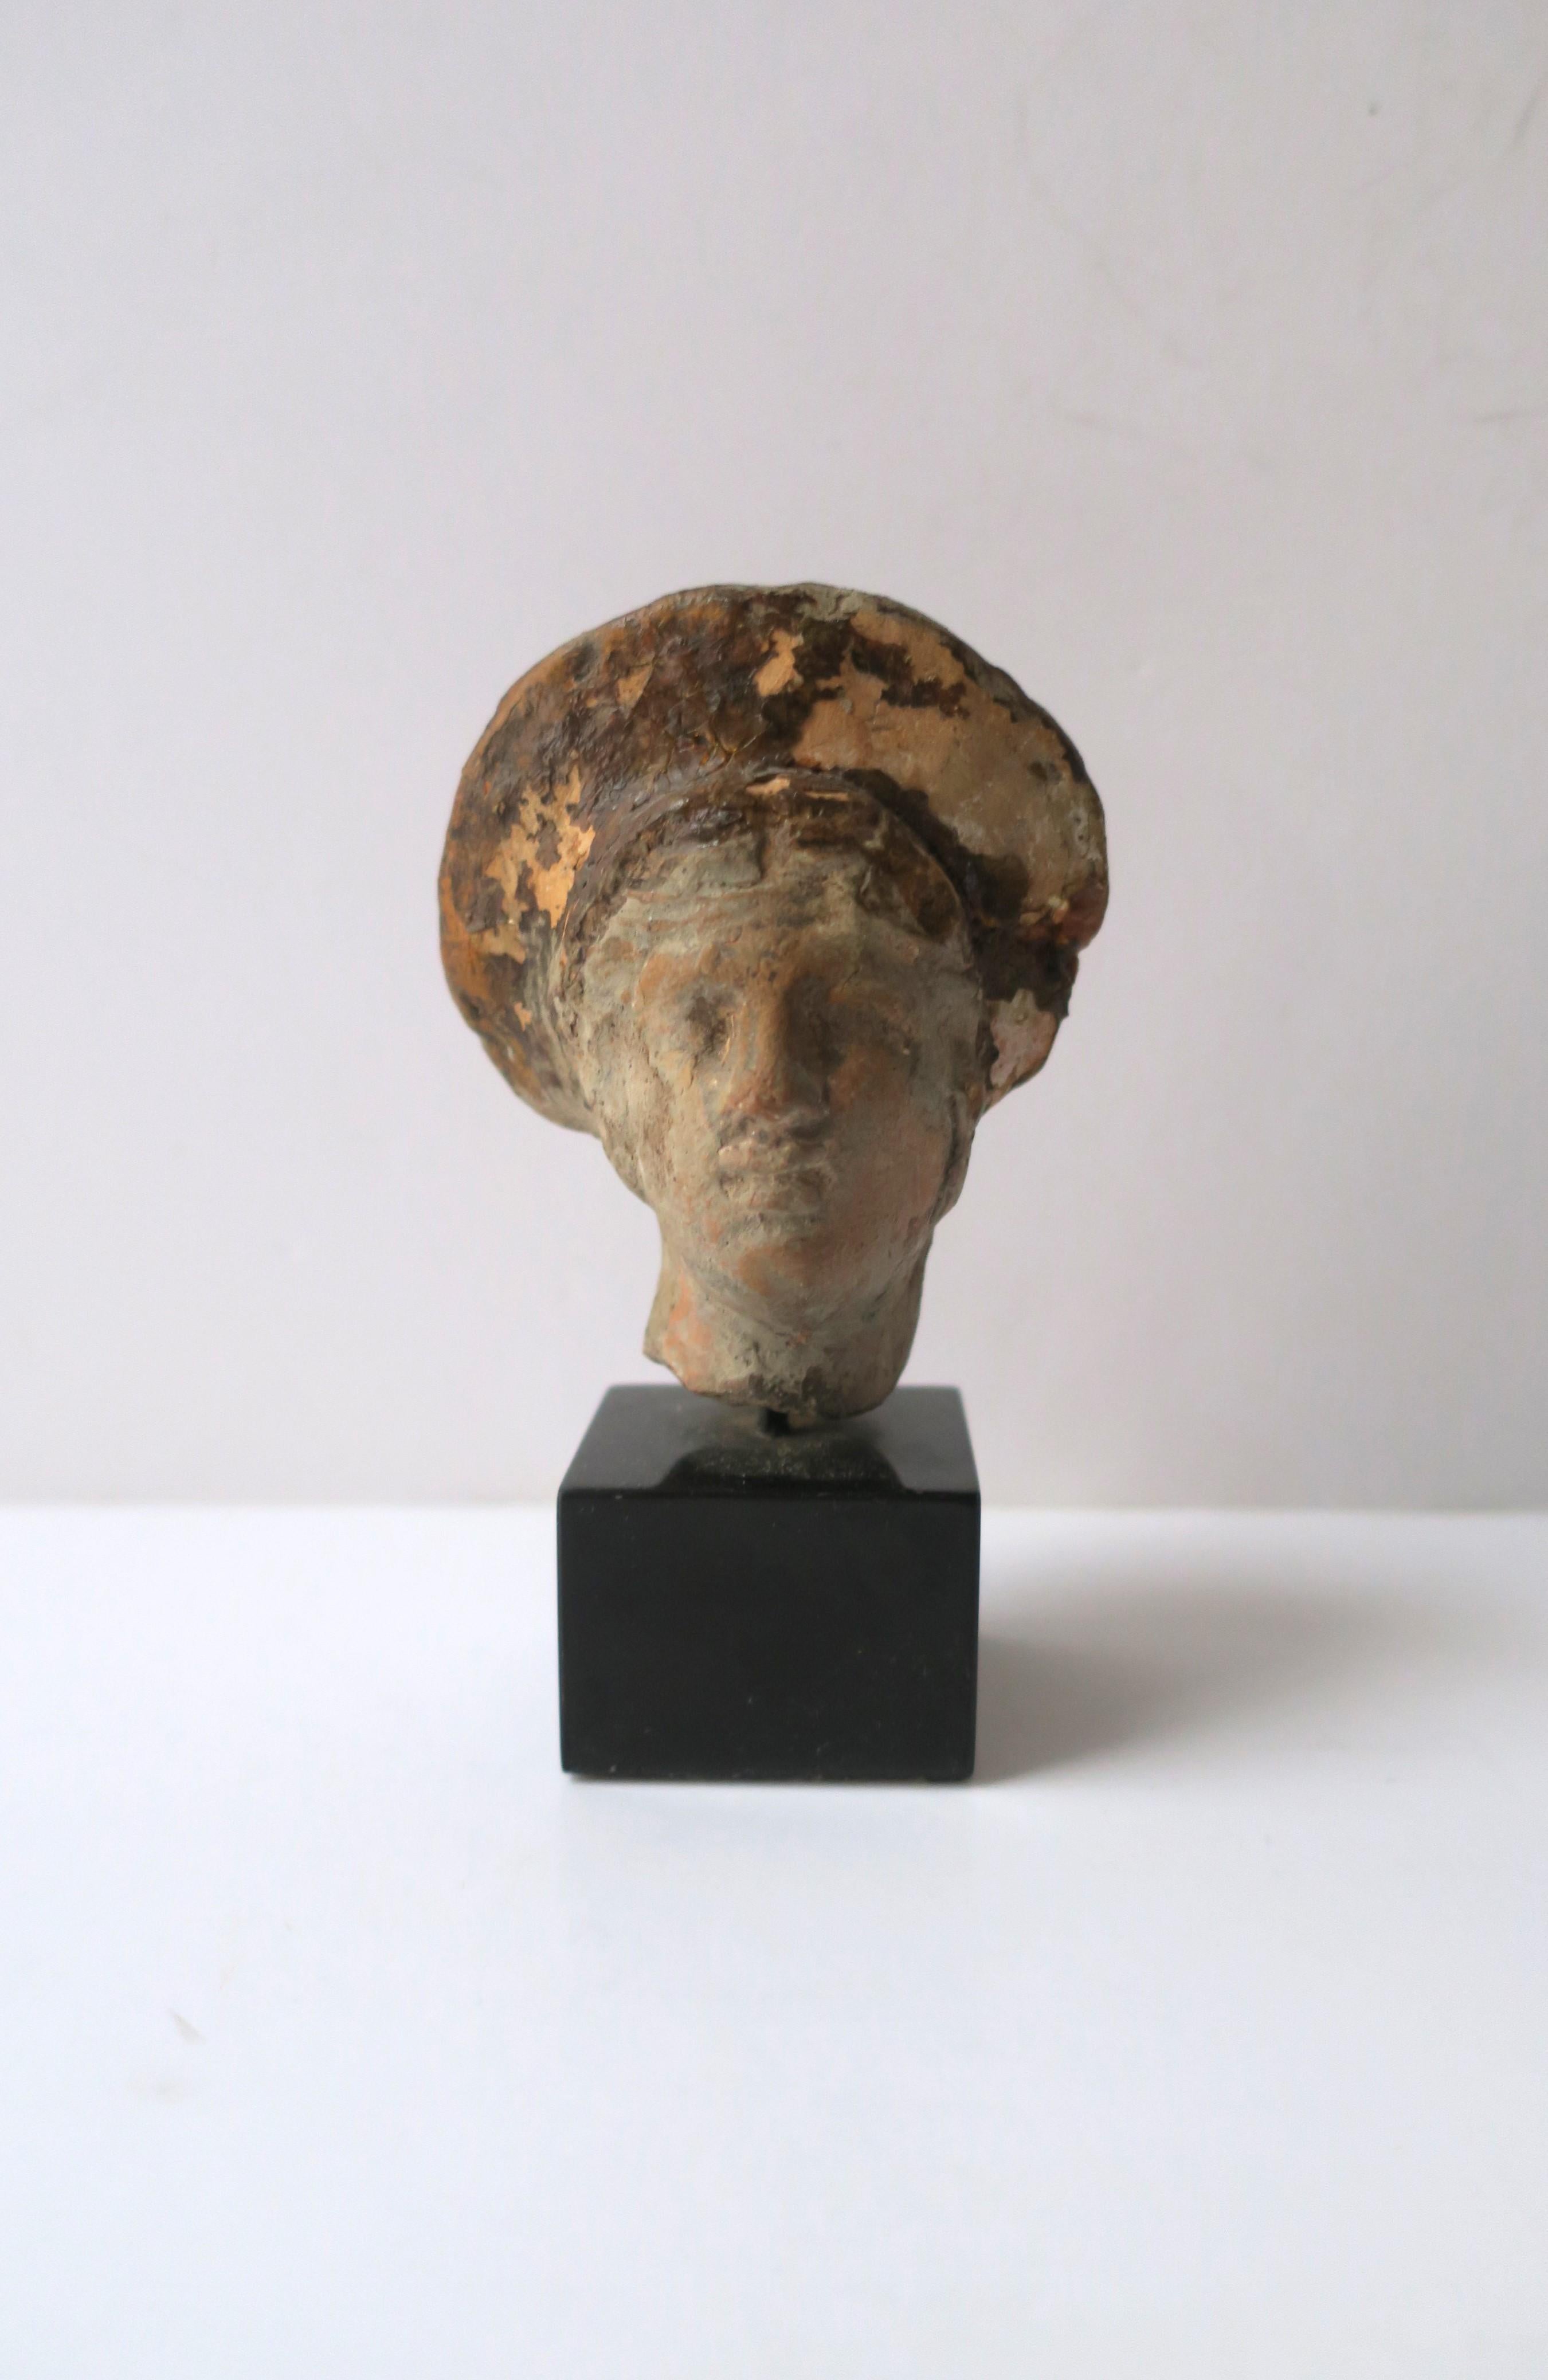 A hand-crafted terracotta head bust sculpture of a Greek Goddess on a black Belgium marble base, Europe, Greece, circa early-20th century or earlier. Exact date unknow. Artist/Sculptor unknown. This beautiful sculpture may work well on an end table,